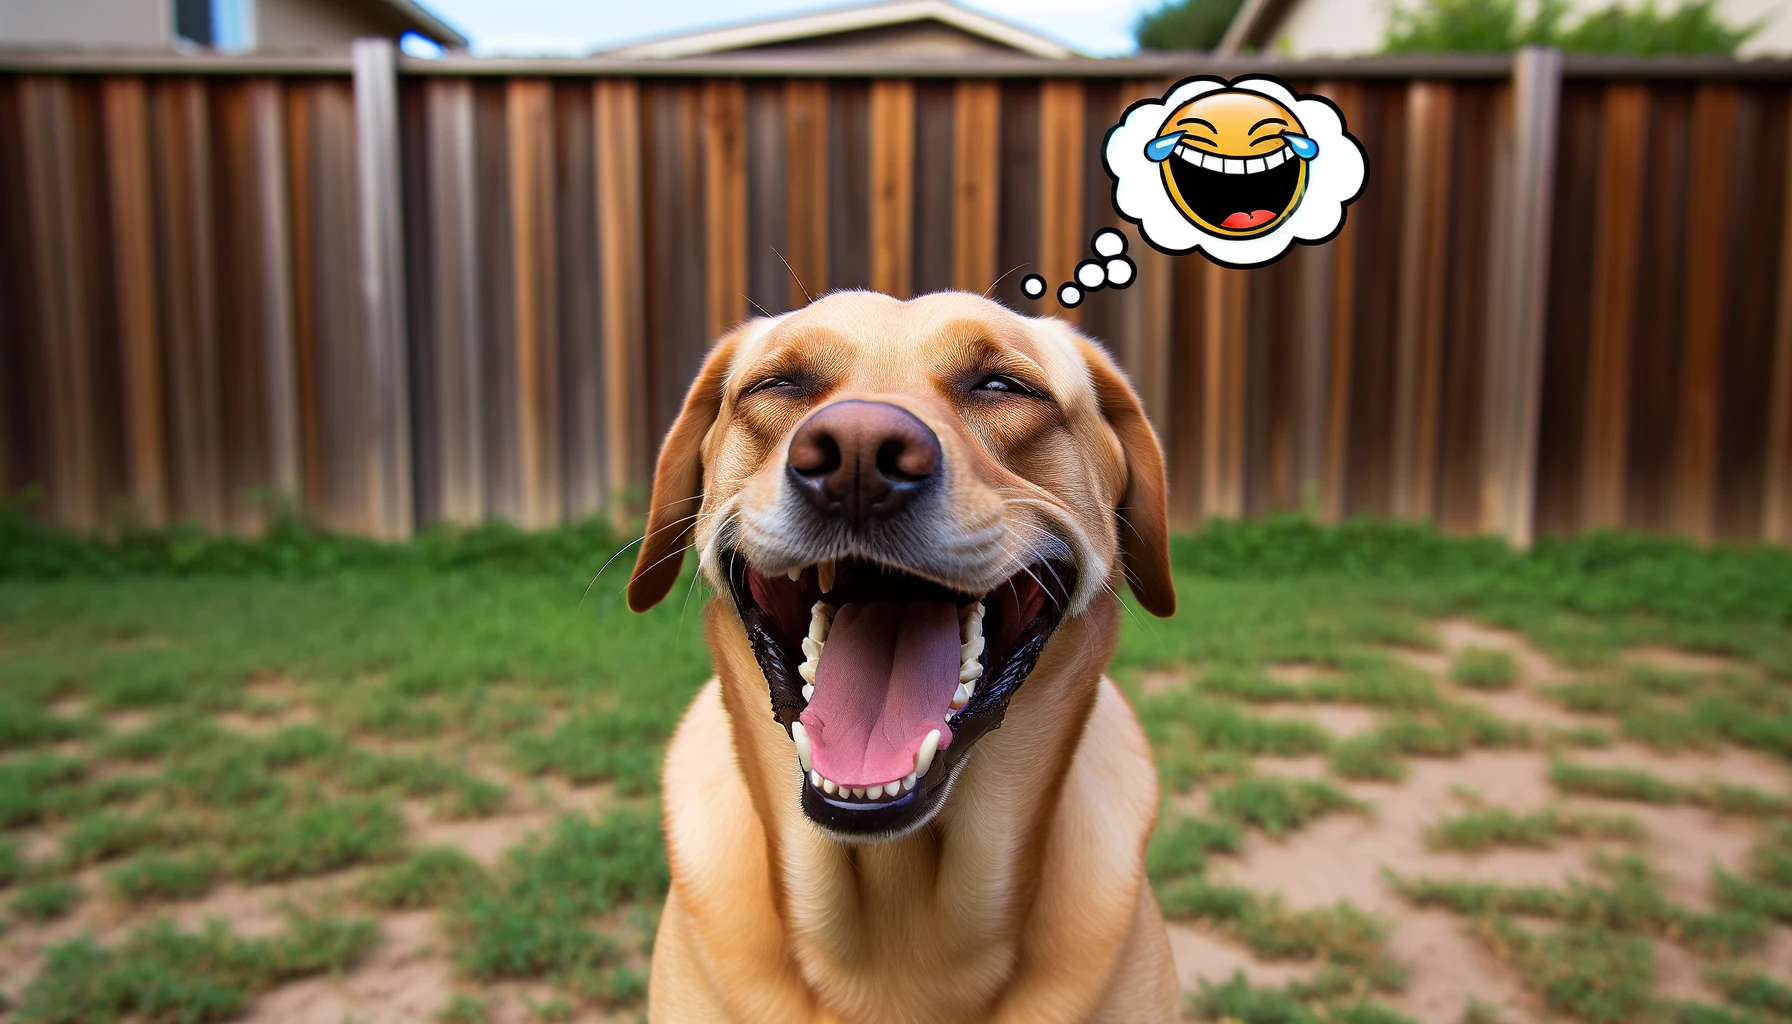 A Green Lab laughing at a joke, because yes, they have a sense of humor too!